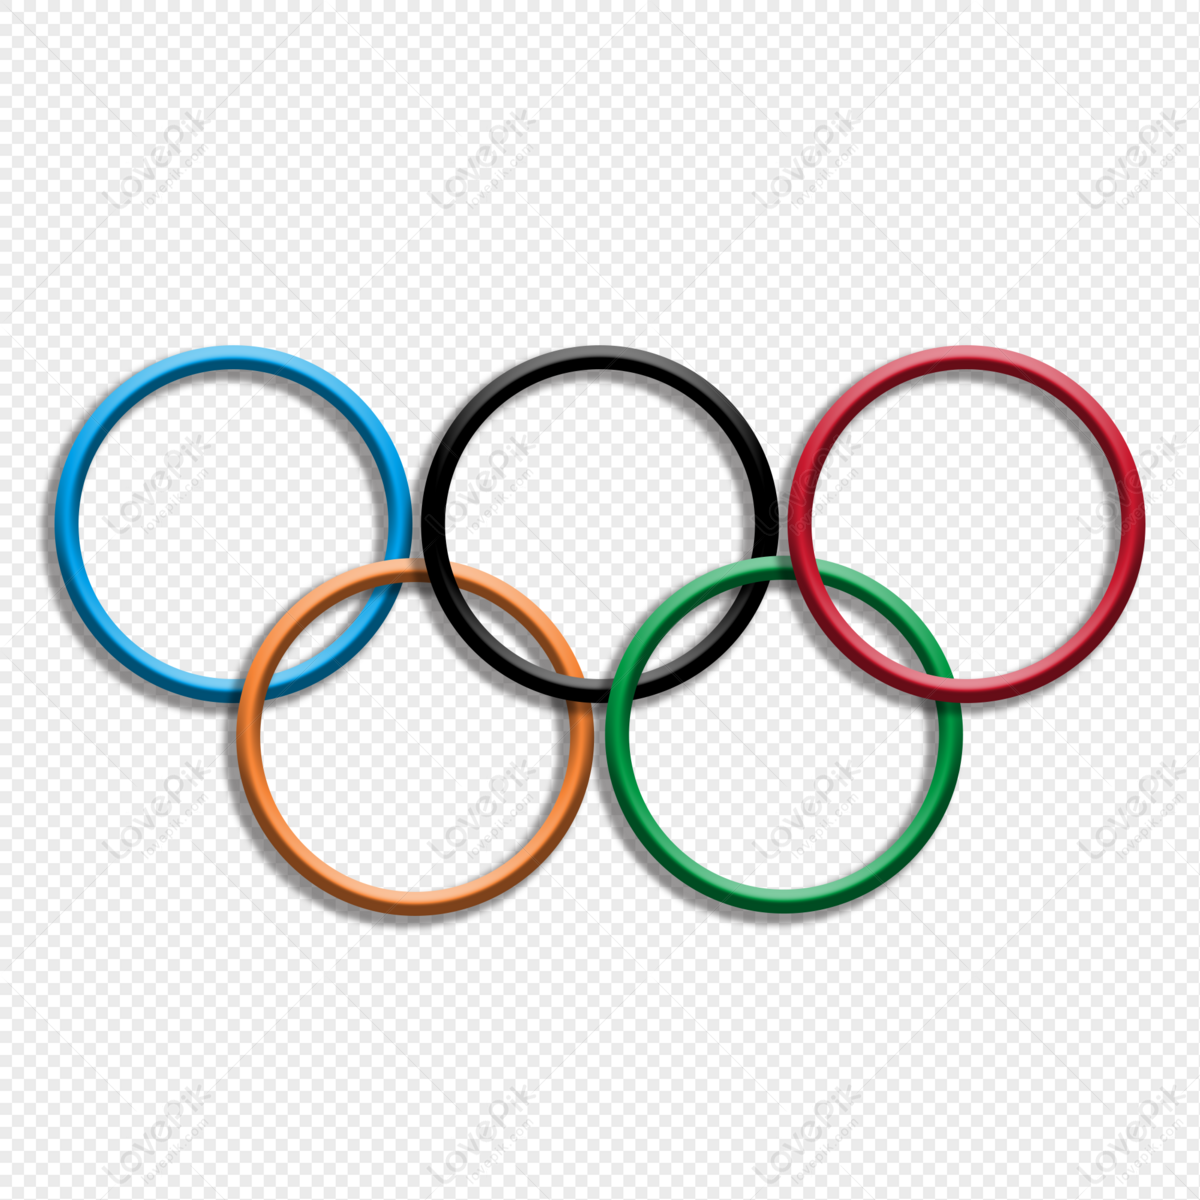 Olympic Circles Concept Stock Illustrations – 40 Olympic Circles Concept  Stock Illustrations, Vectors & Clipart - Dreamstime